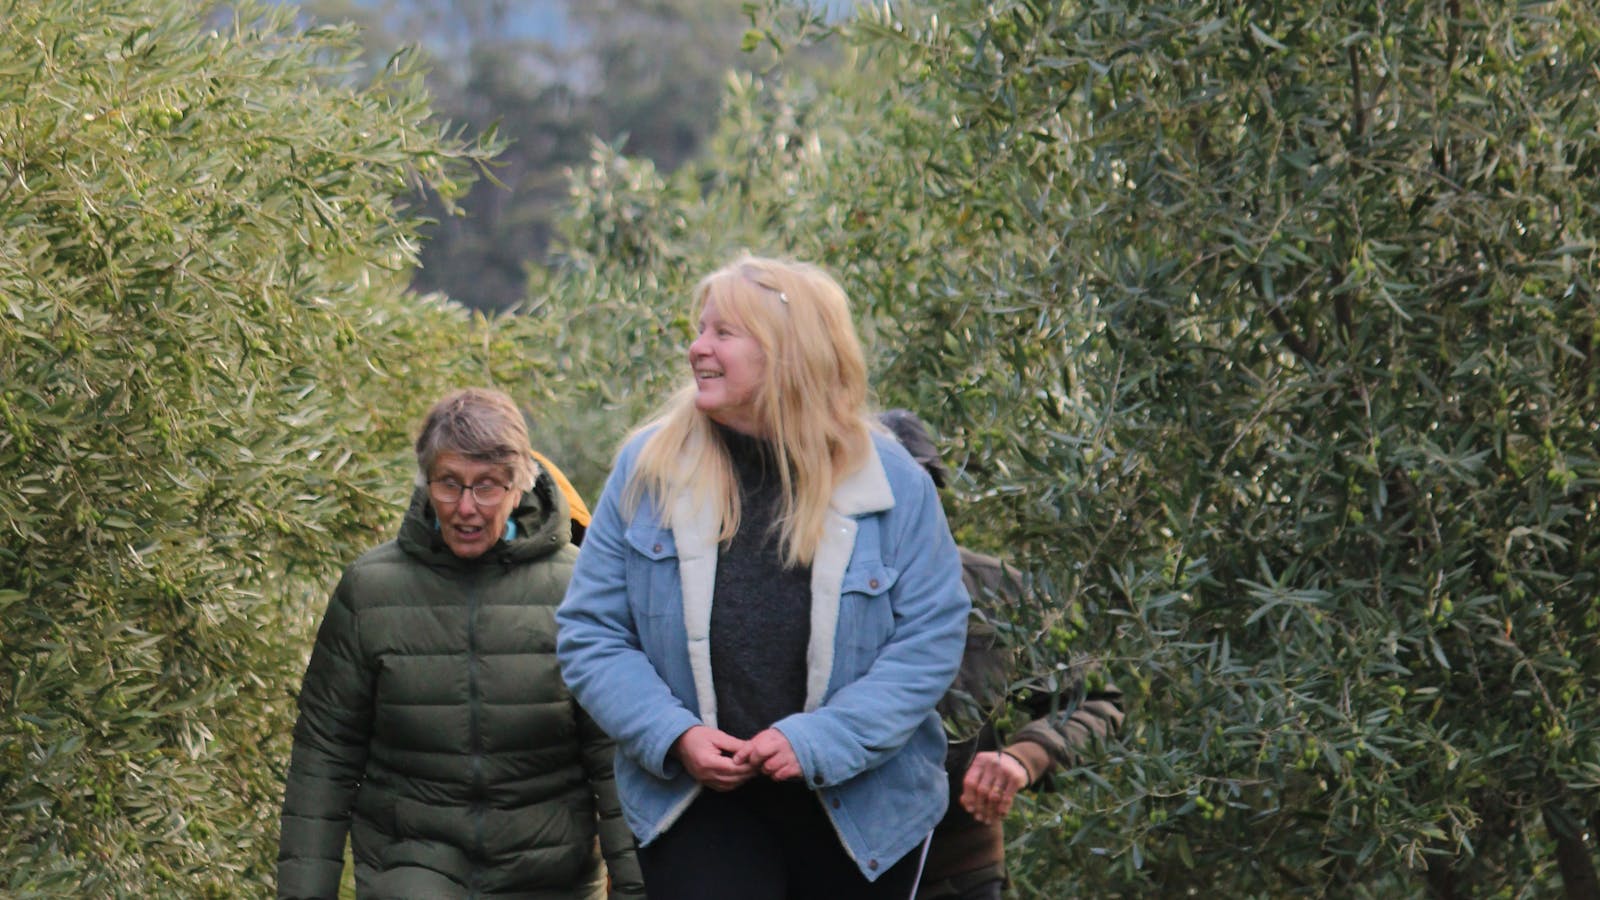 Touring the olive orchard